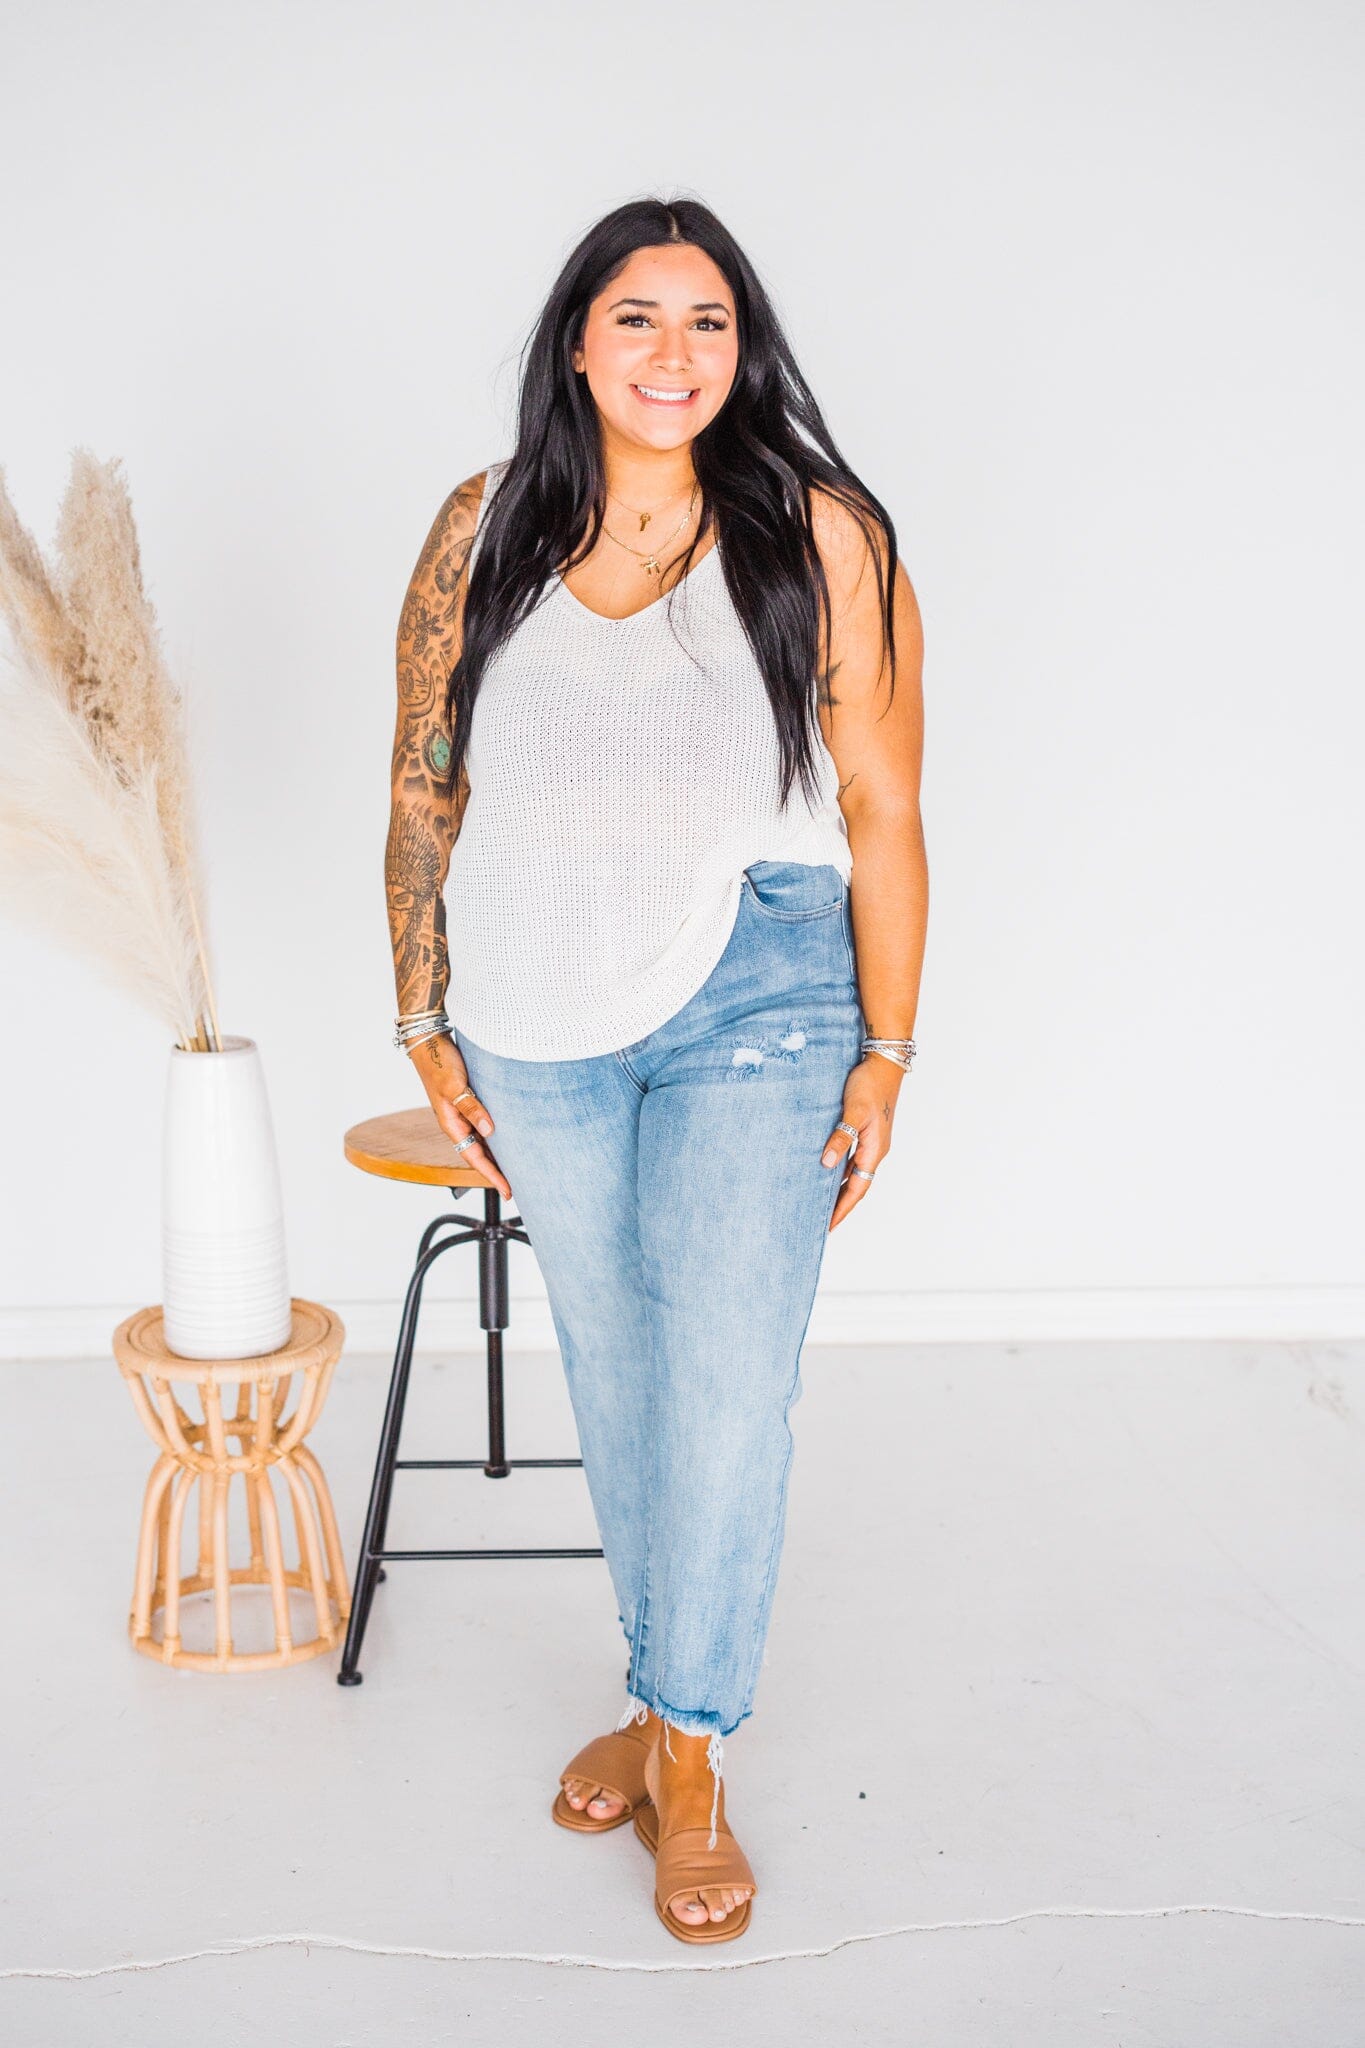 High Rise and Shine Straight Leg Jeans - Rollick